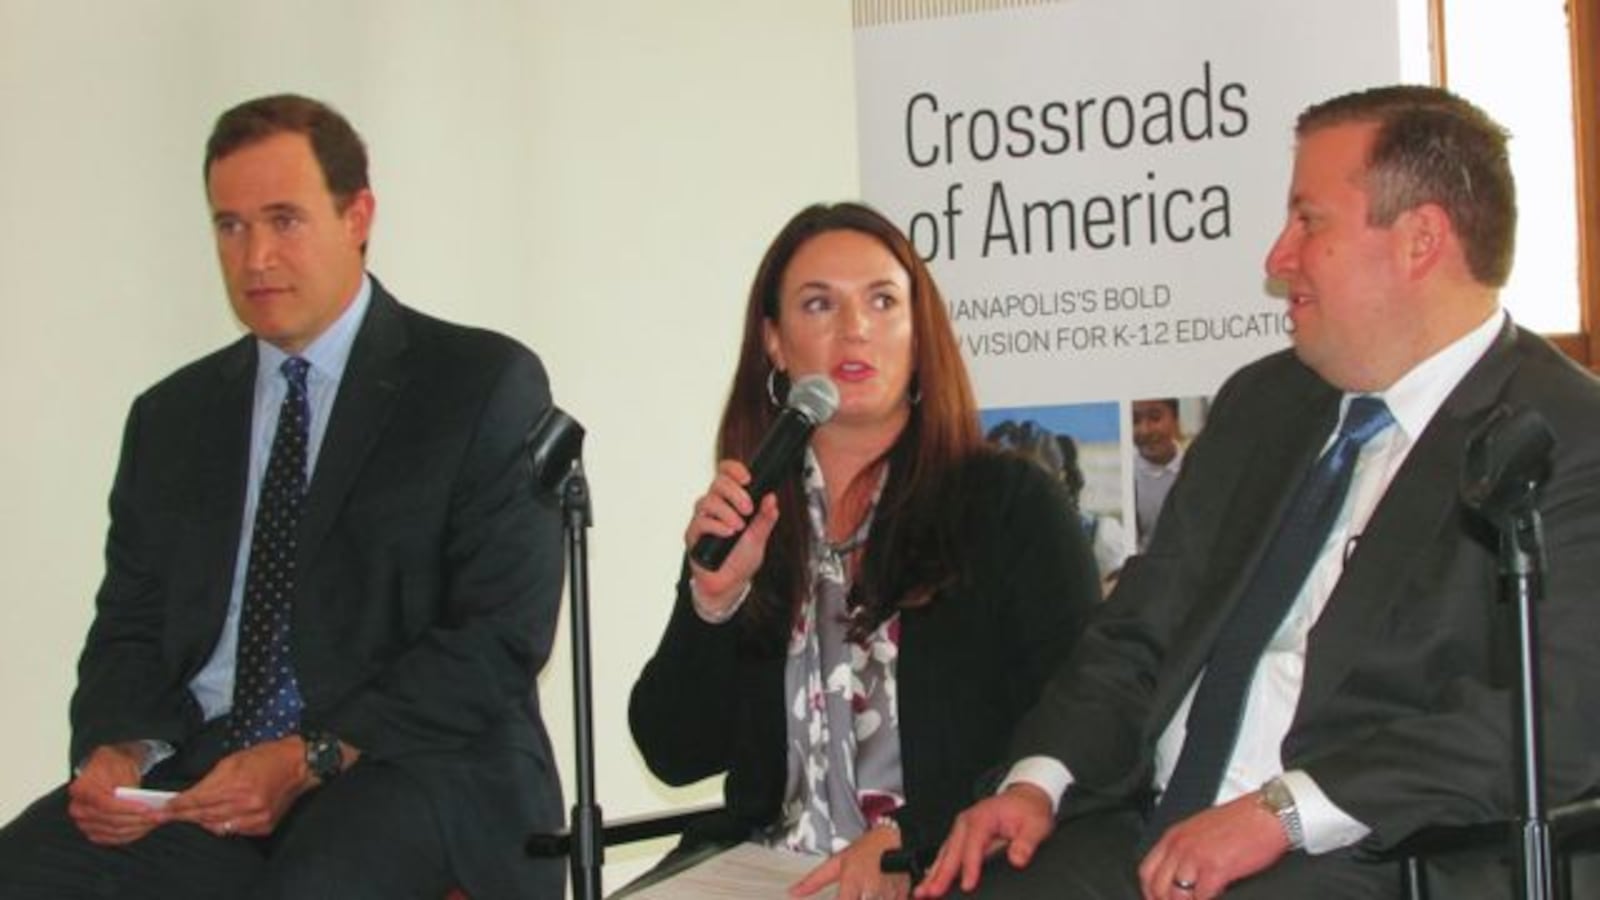 Mind Trust CEO David Harris, IPS curriculum officer Tammy Bowman and Deputy Mayor Jason Kloth discuss public, charter and private school cooperation at a panel sponsored by the University of Notre Dame’s Alliance for Catholic Education.